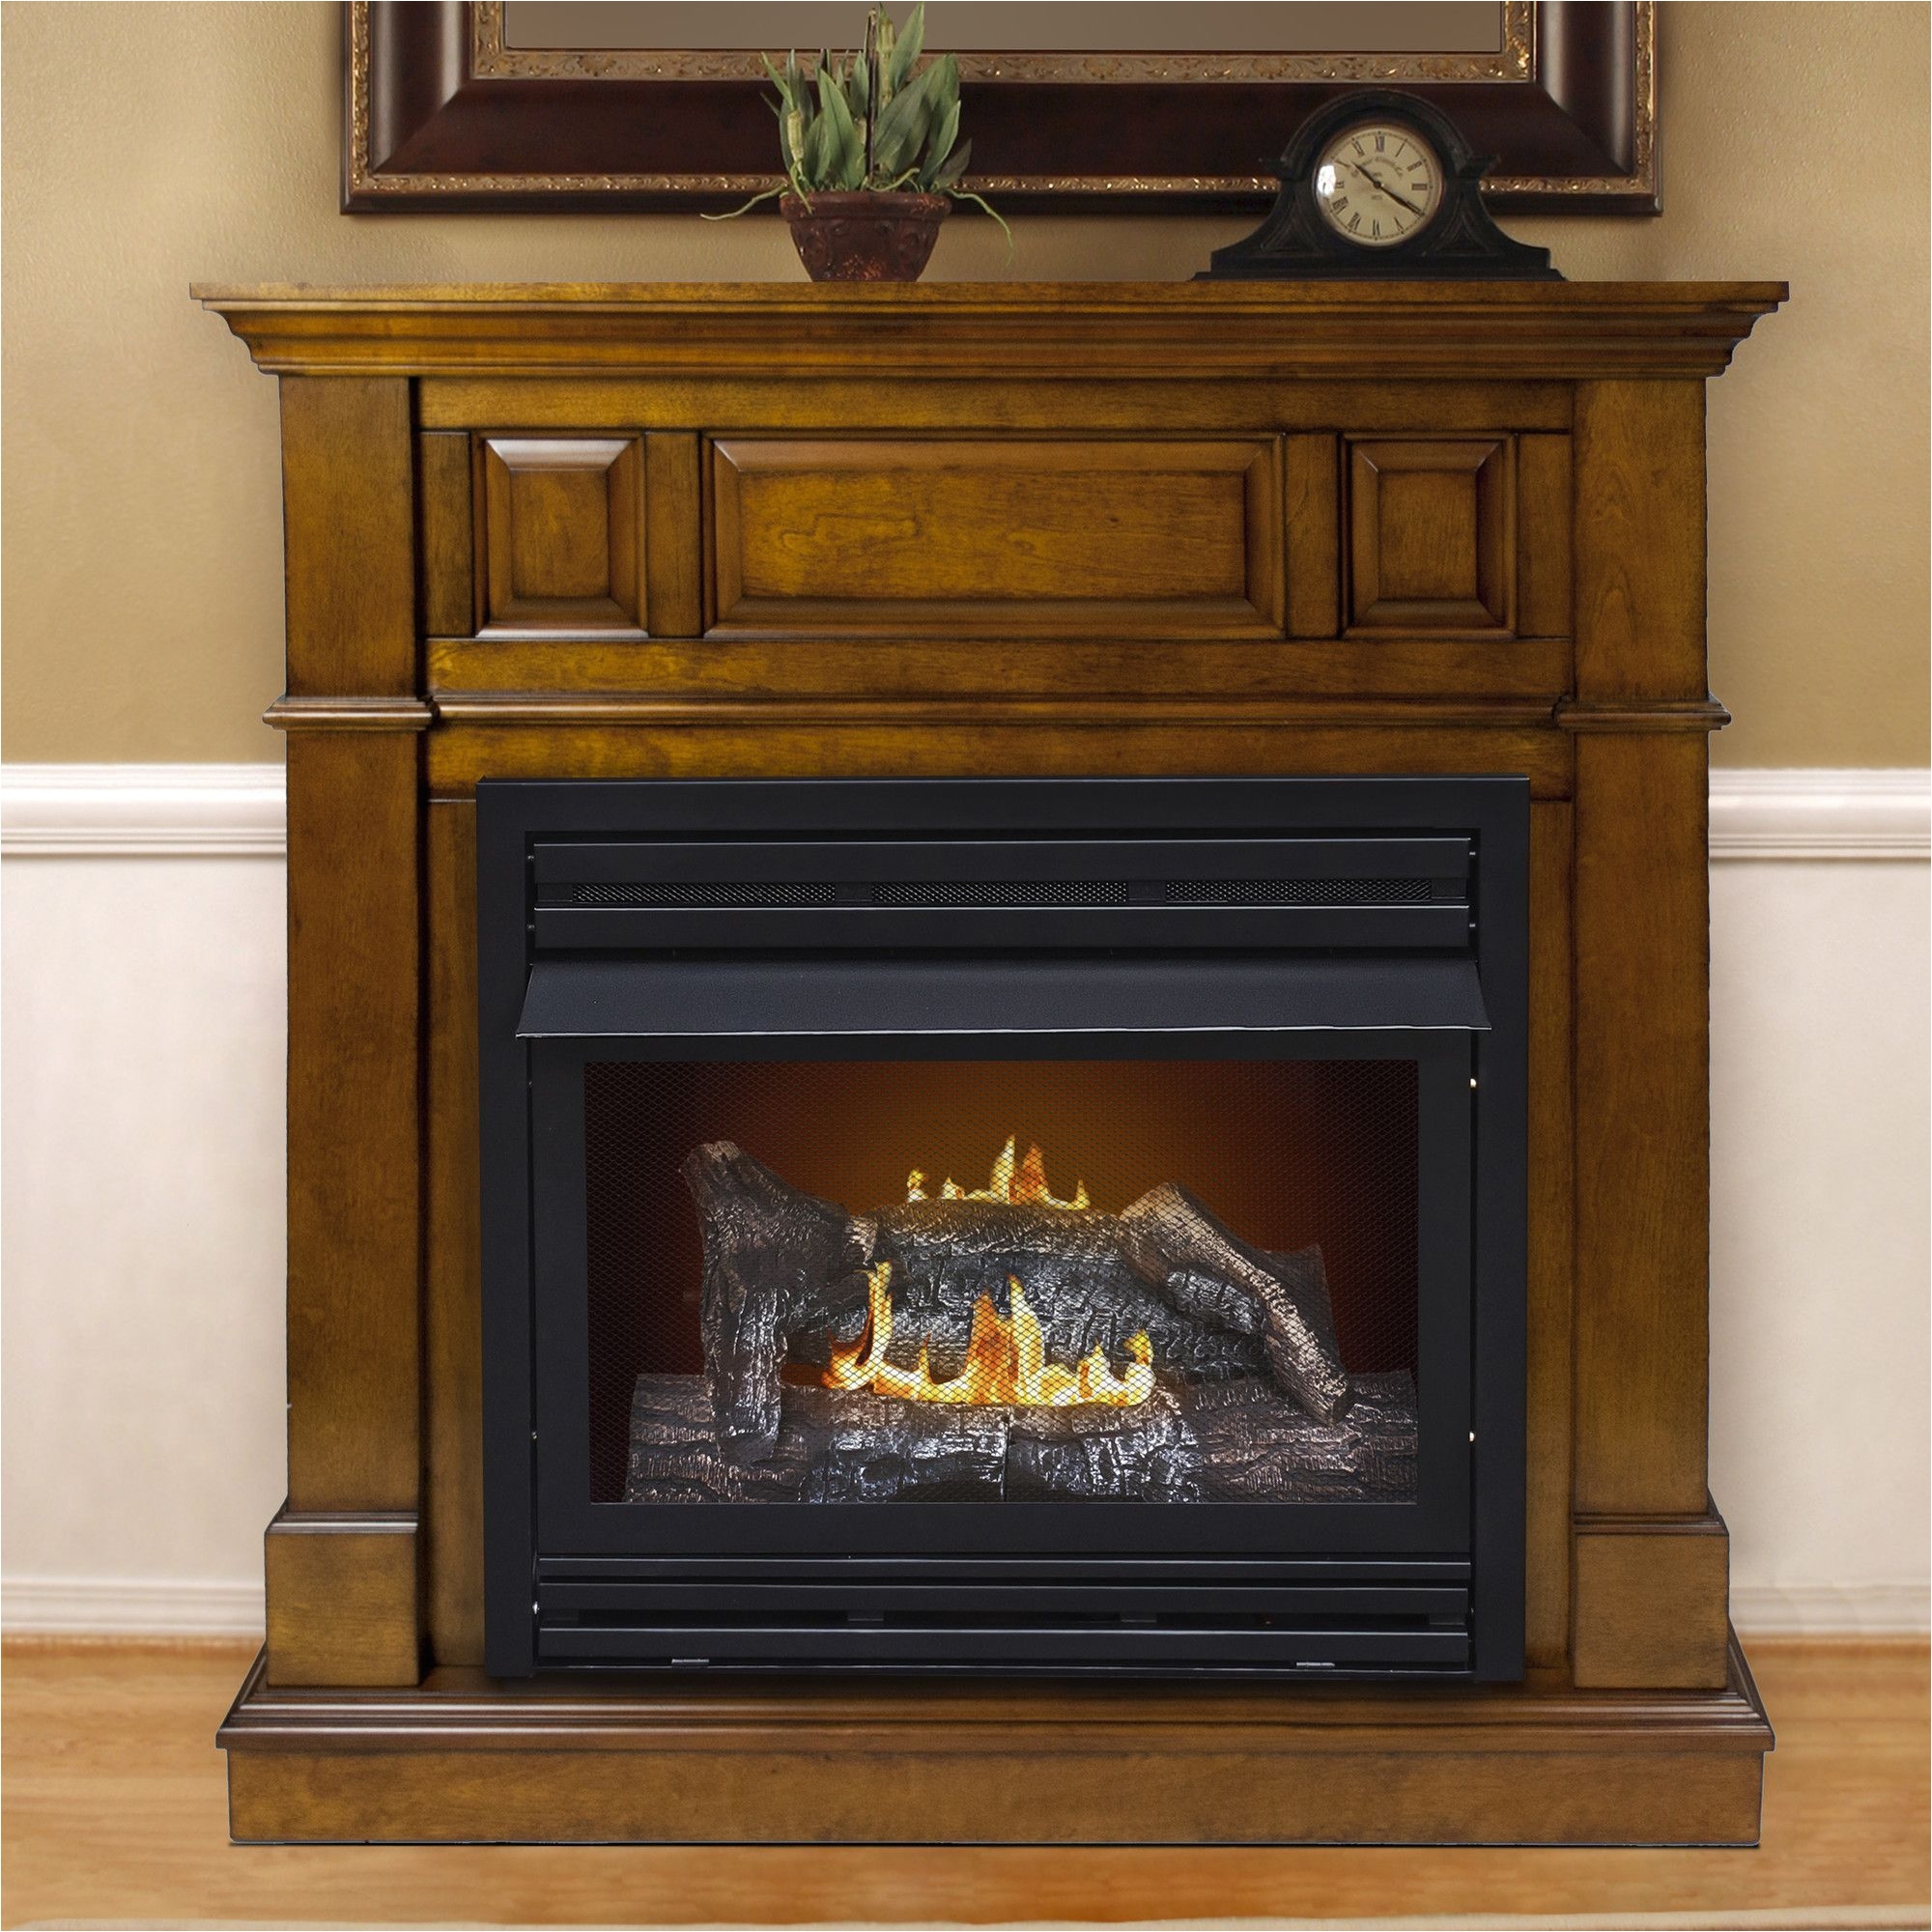 Wall Mounted Gel Fuel Fireplace Dual Fuel Vent Free Wall Mount Gas Fireplace Products Pinterest